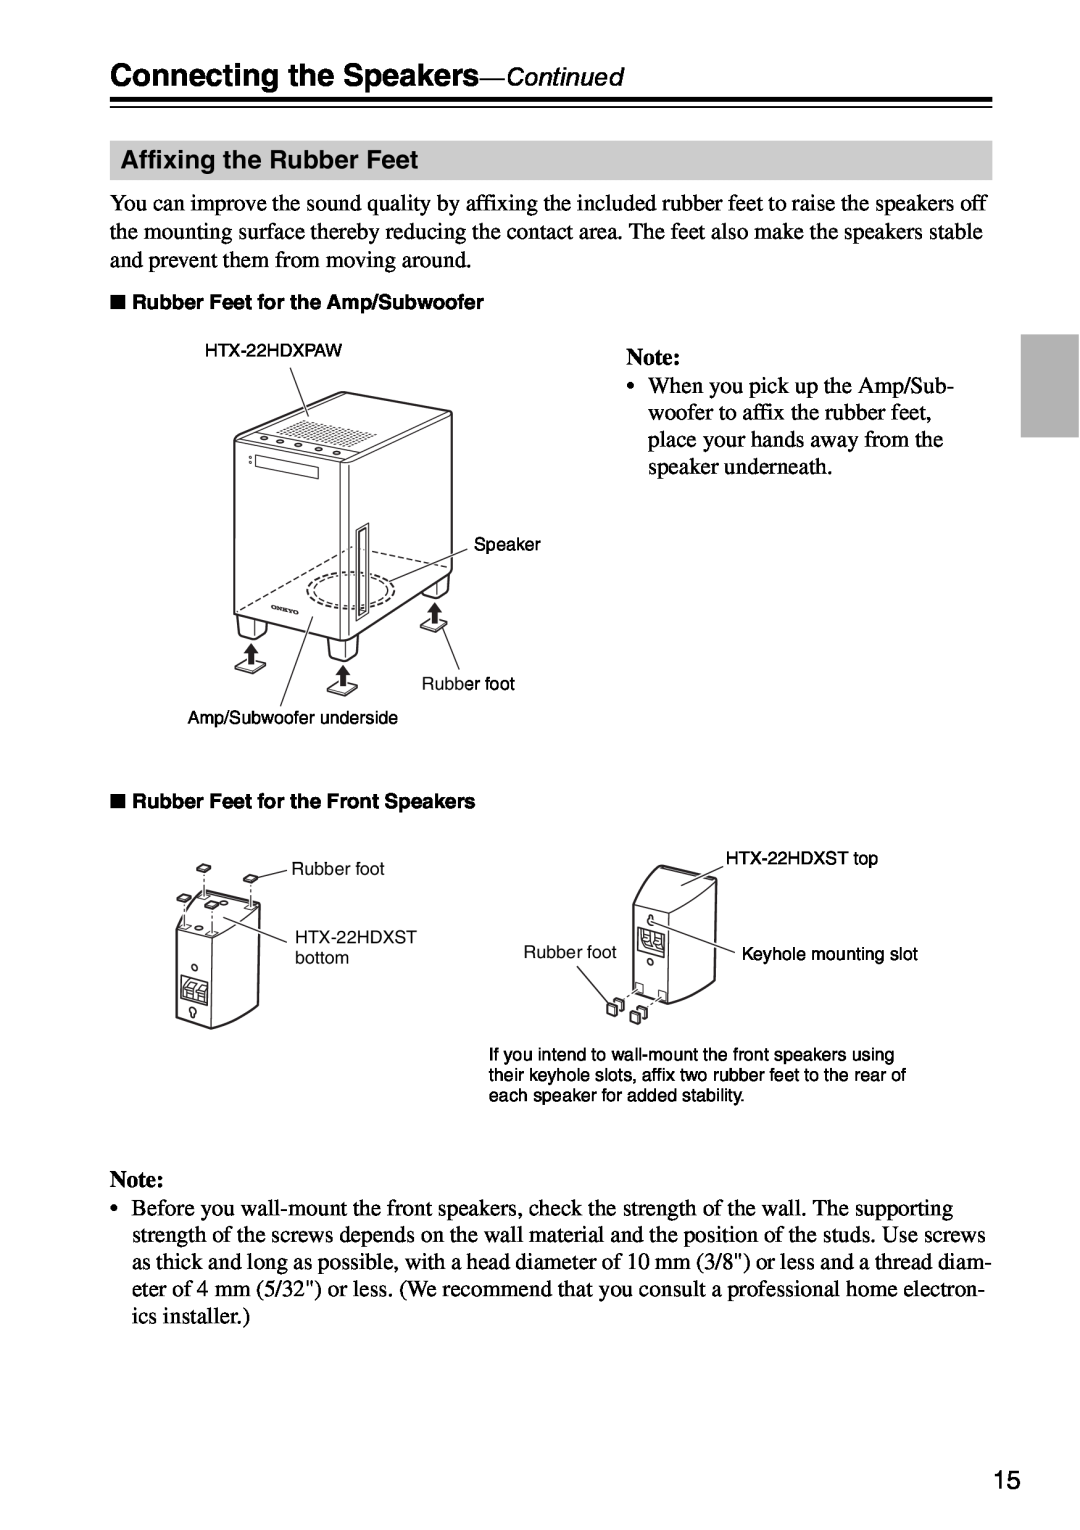 Onkyo HTX-22HDXST, HTX-22HDXPAW instruction manual Connecting the Speakers-Continued, Affixing the Rubber Feet 